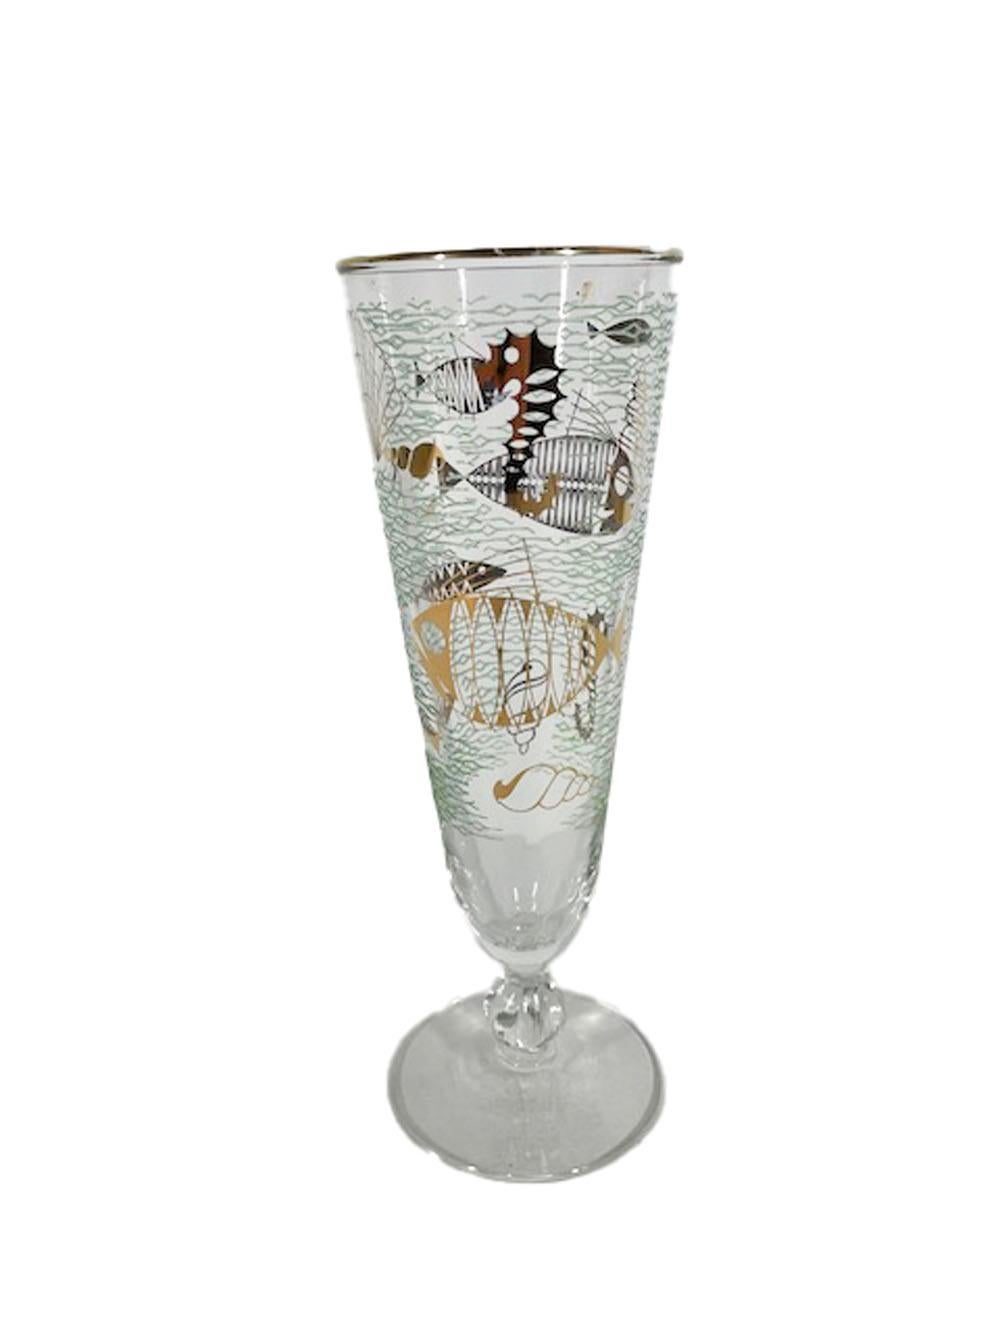 American Six Libbey Atomic Style Pilsner Glasses in the Marine Life Pattern